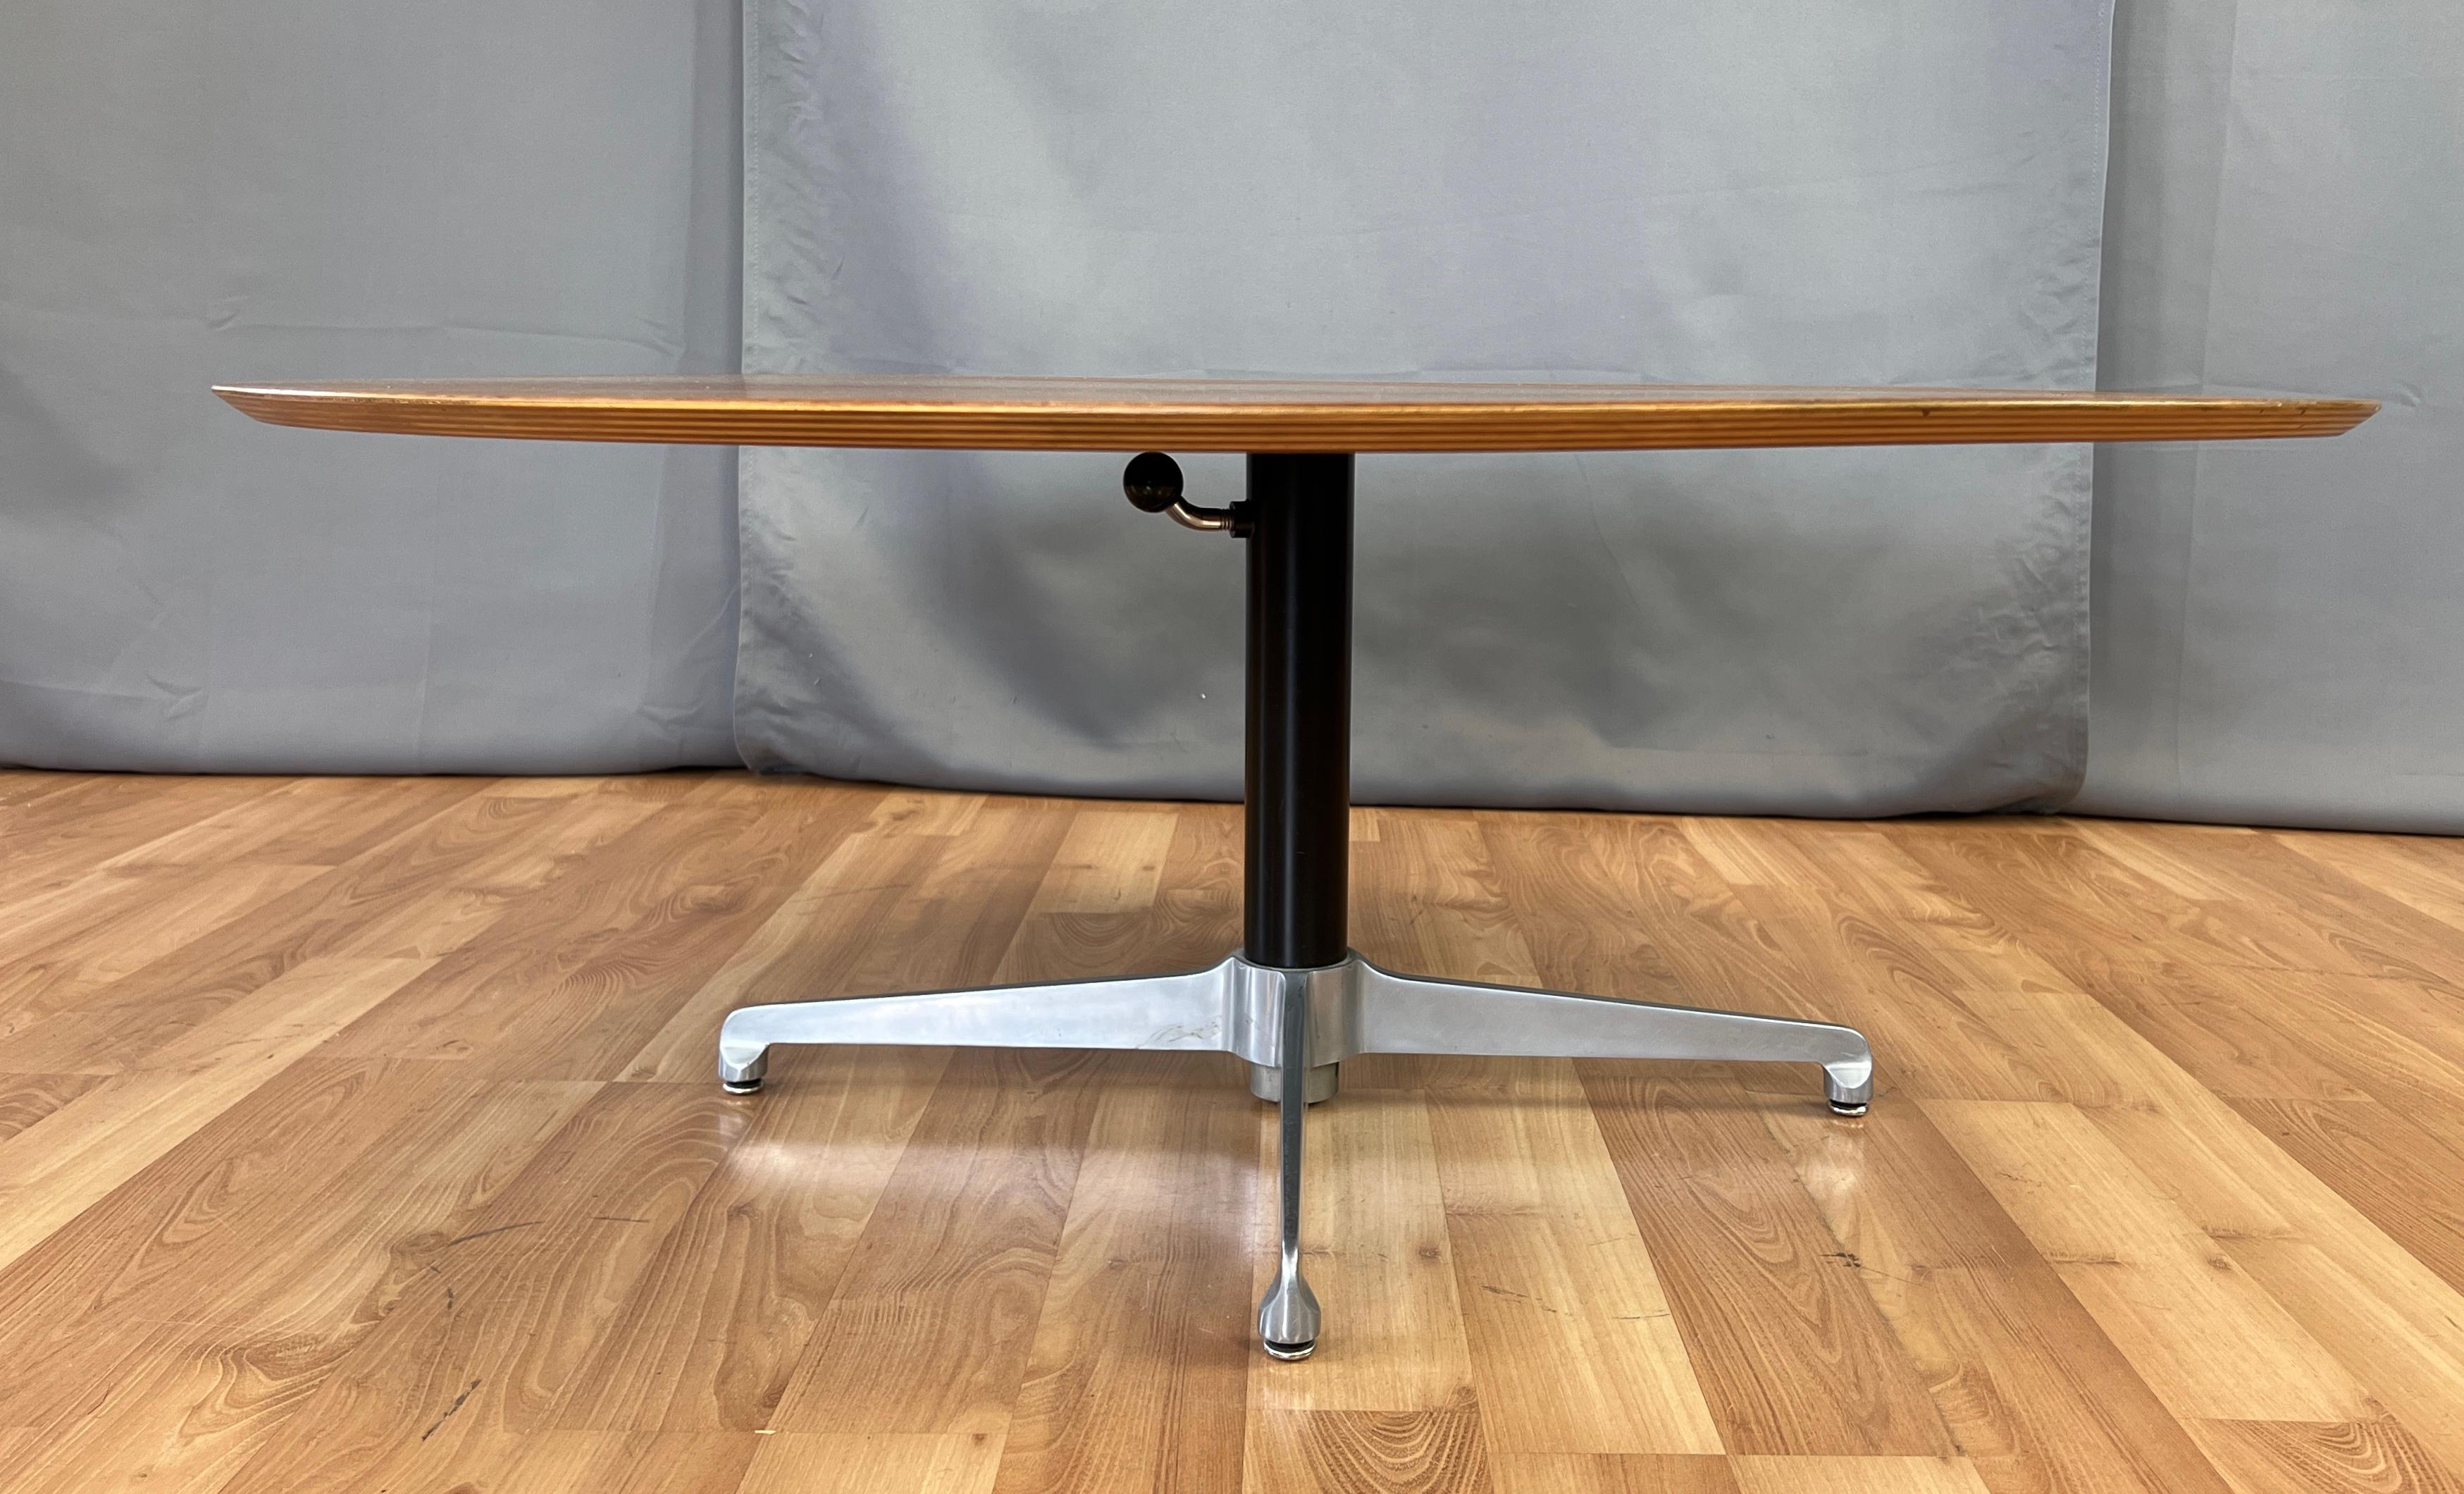 Offered here is a good size Danish modern adjustable height coffee, that also can be used as a dining table, with a four star aluminum base with adjustable glides. Perfect if you don't have the room for both a coffee and dining table.
Round top is